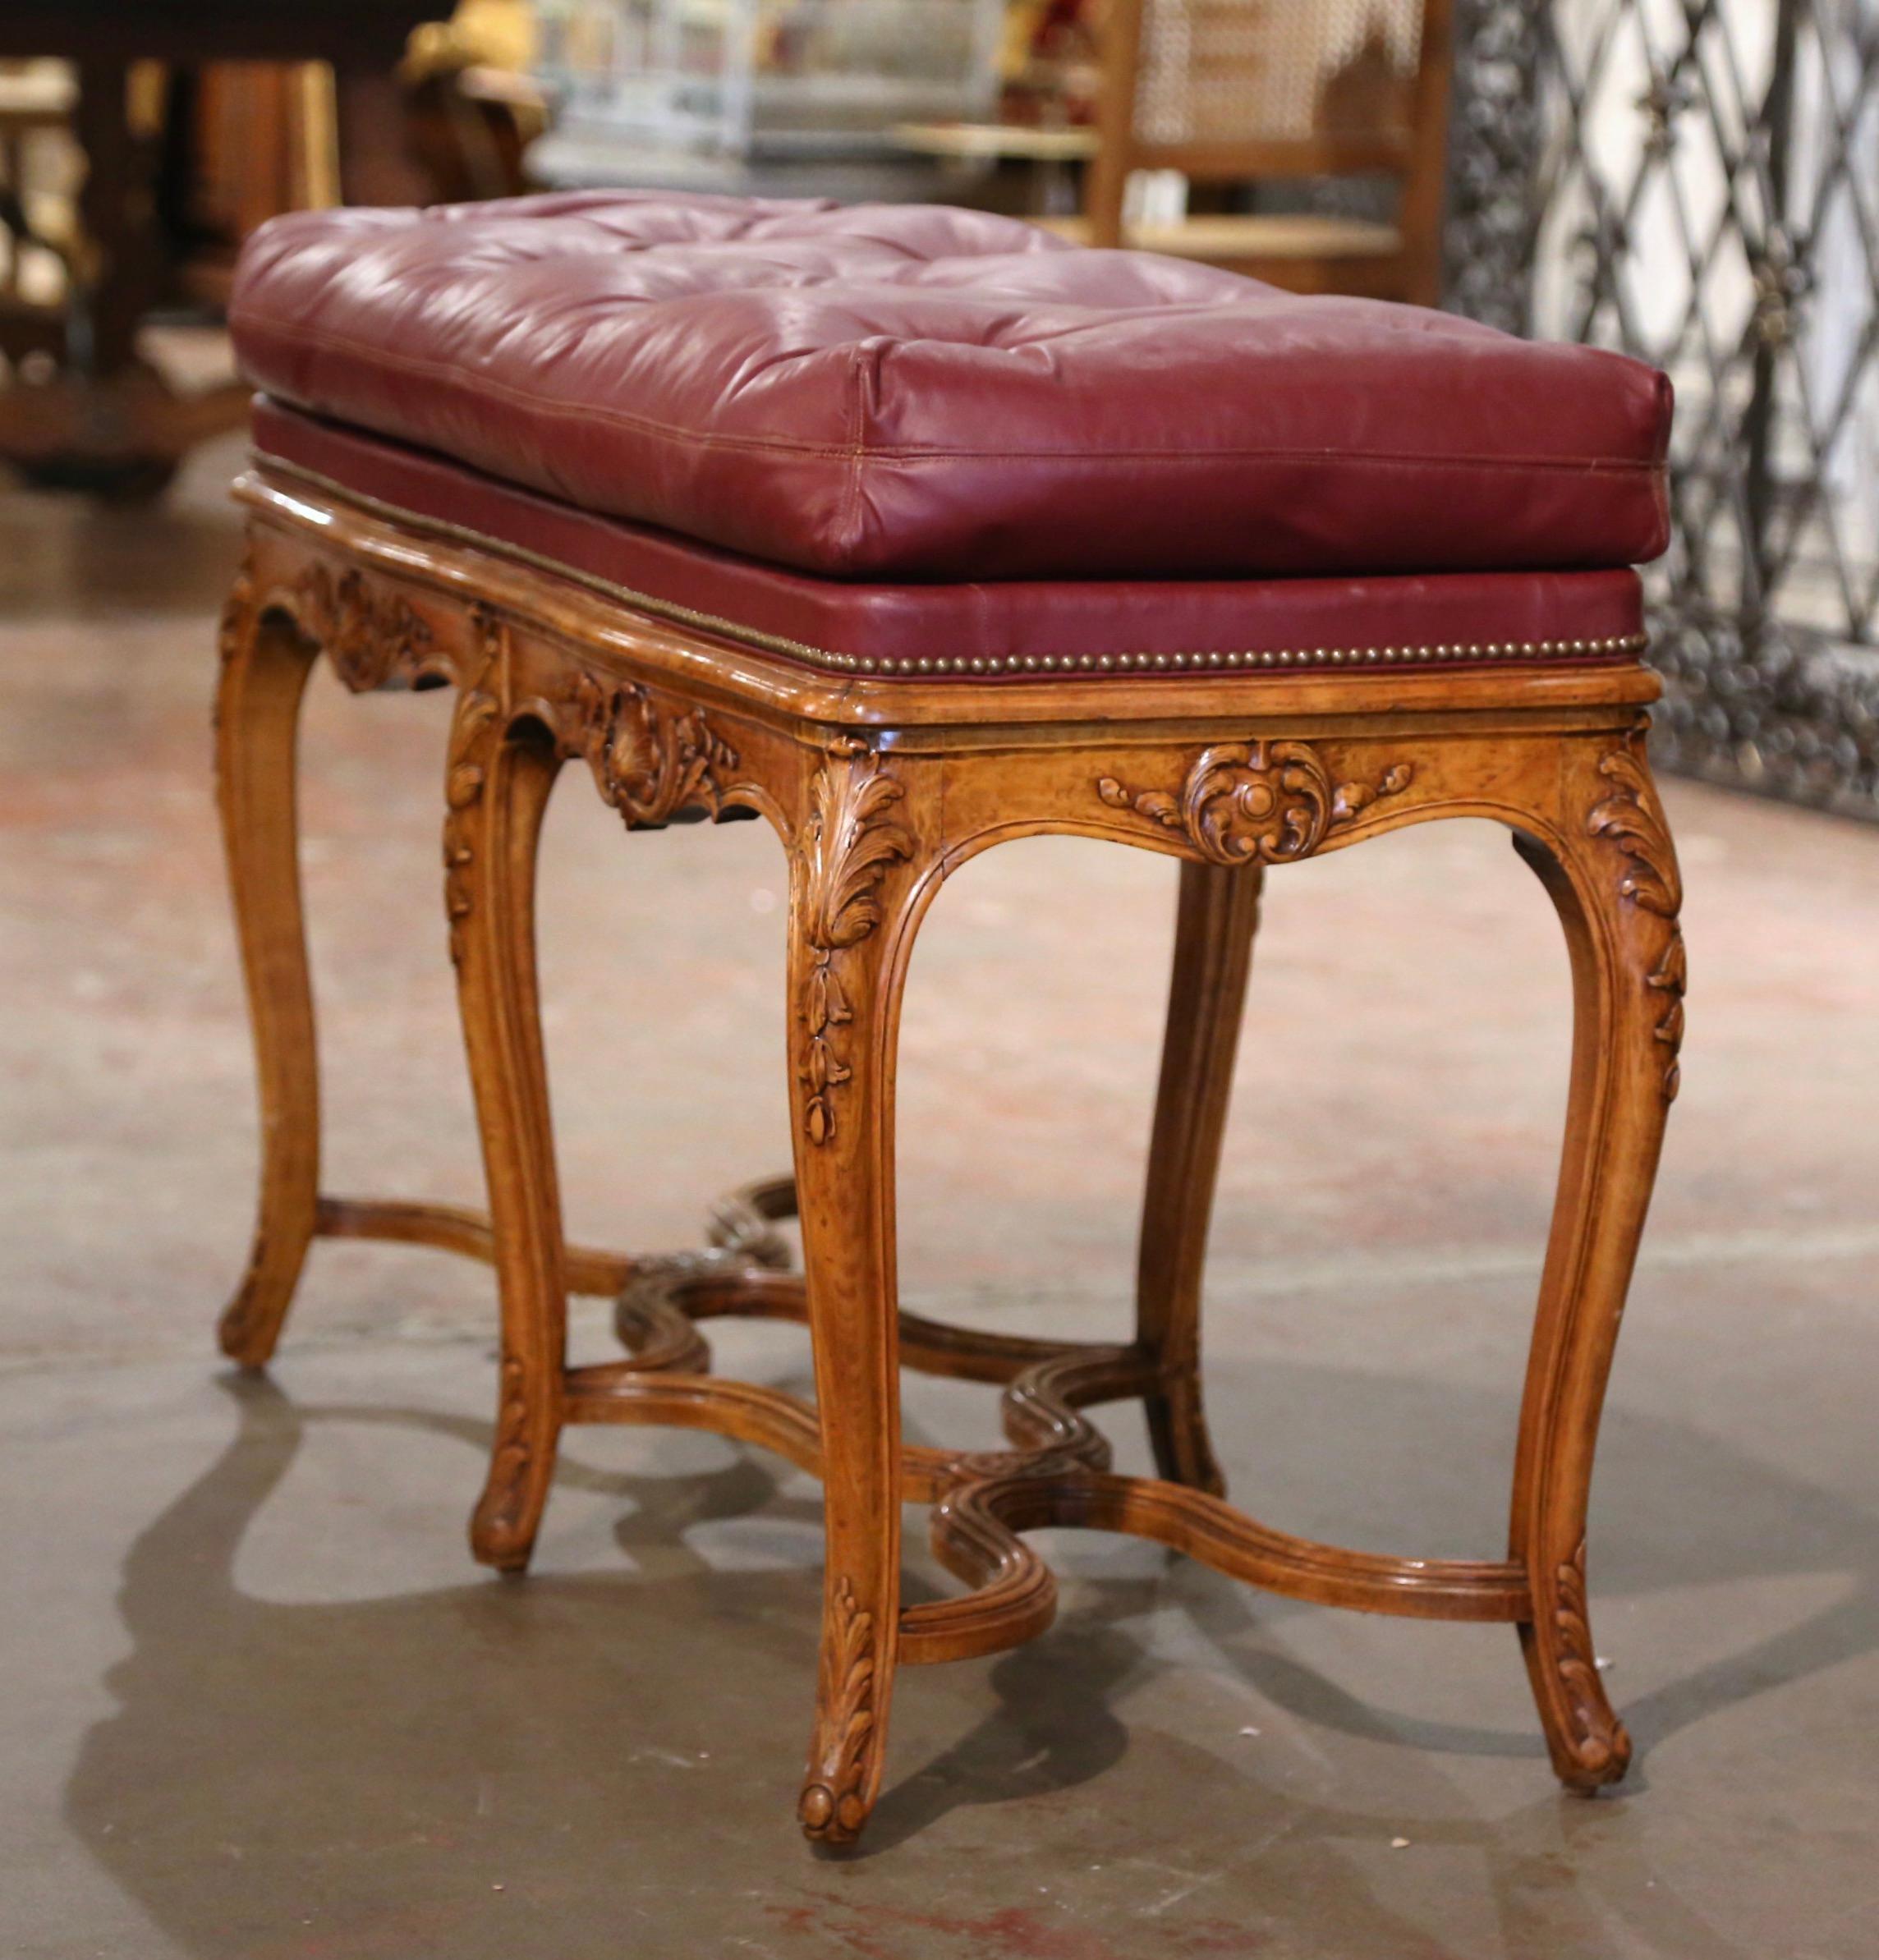 20th Century Midcentury French Louis XV Carved Walnut Bench with Hermes Leather Upholstery 